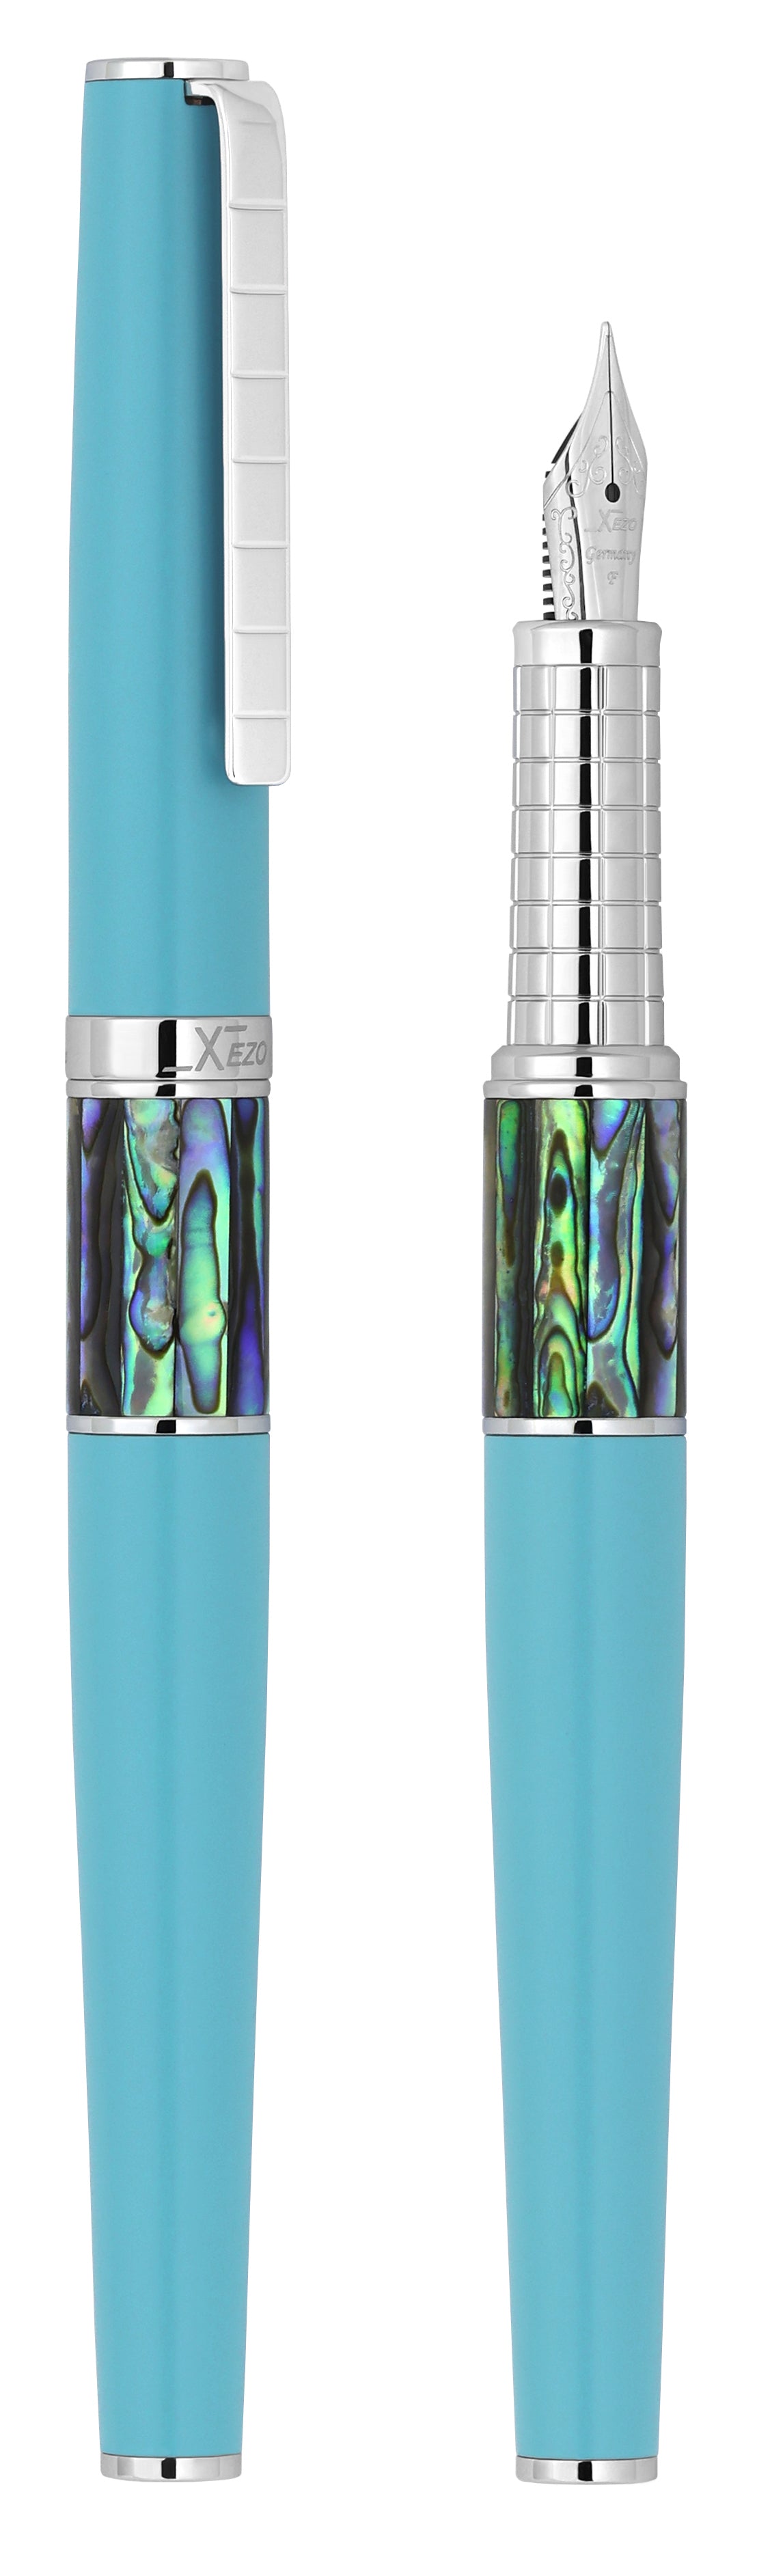 Xezo - Vertical view of two Speed Master Sky Blue F-AC Fountain pens; the one on the left is capped, and the one on the right is uncapped